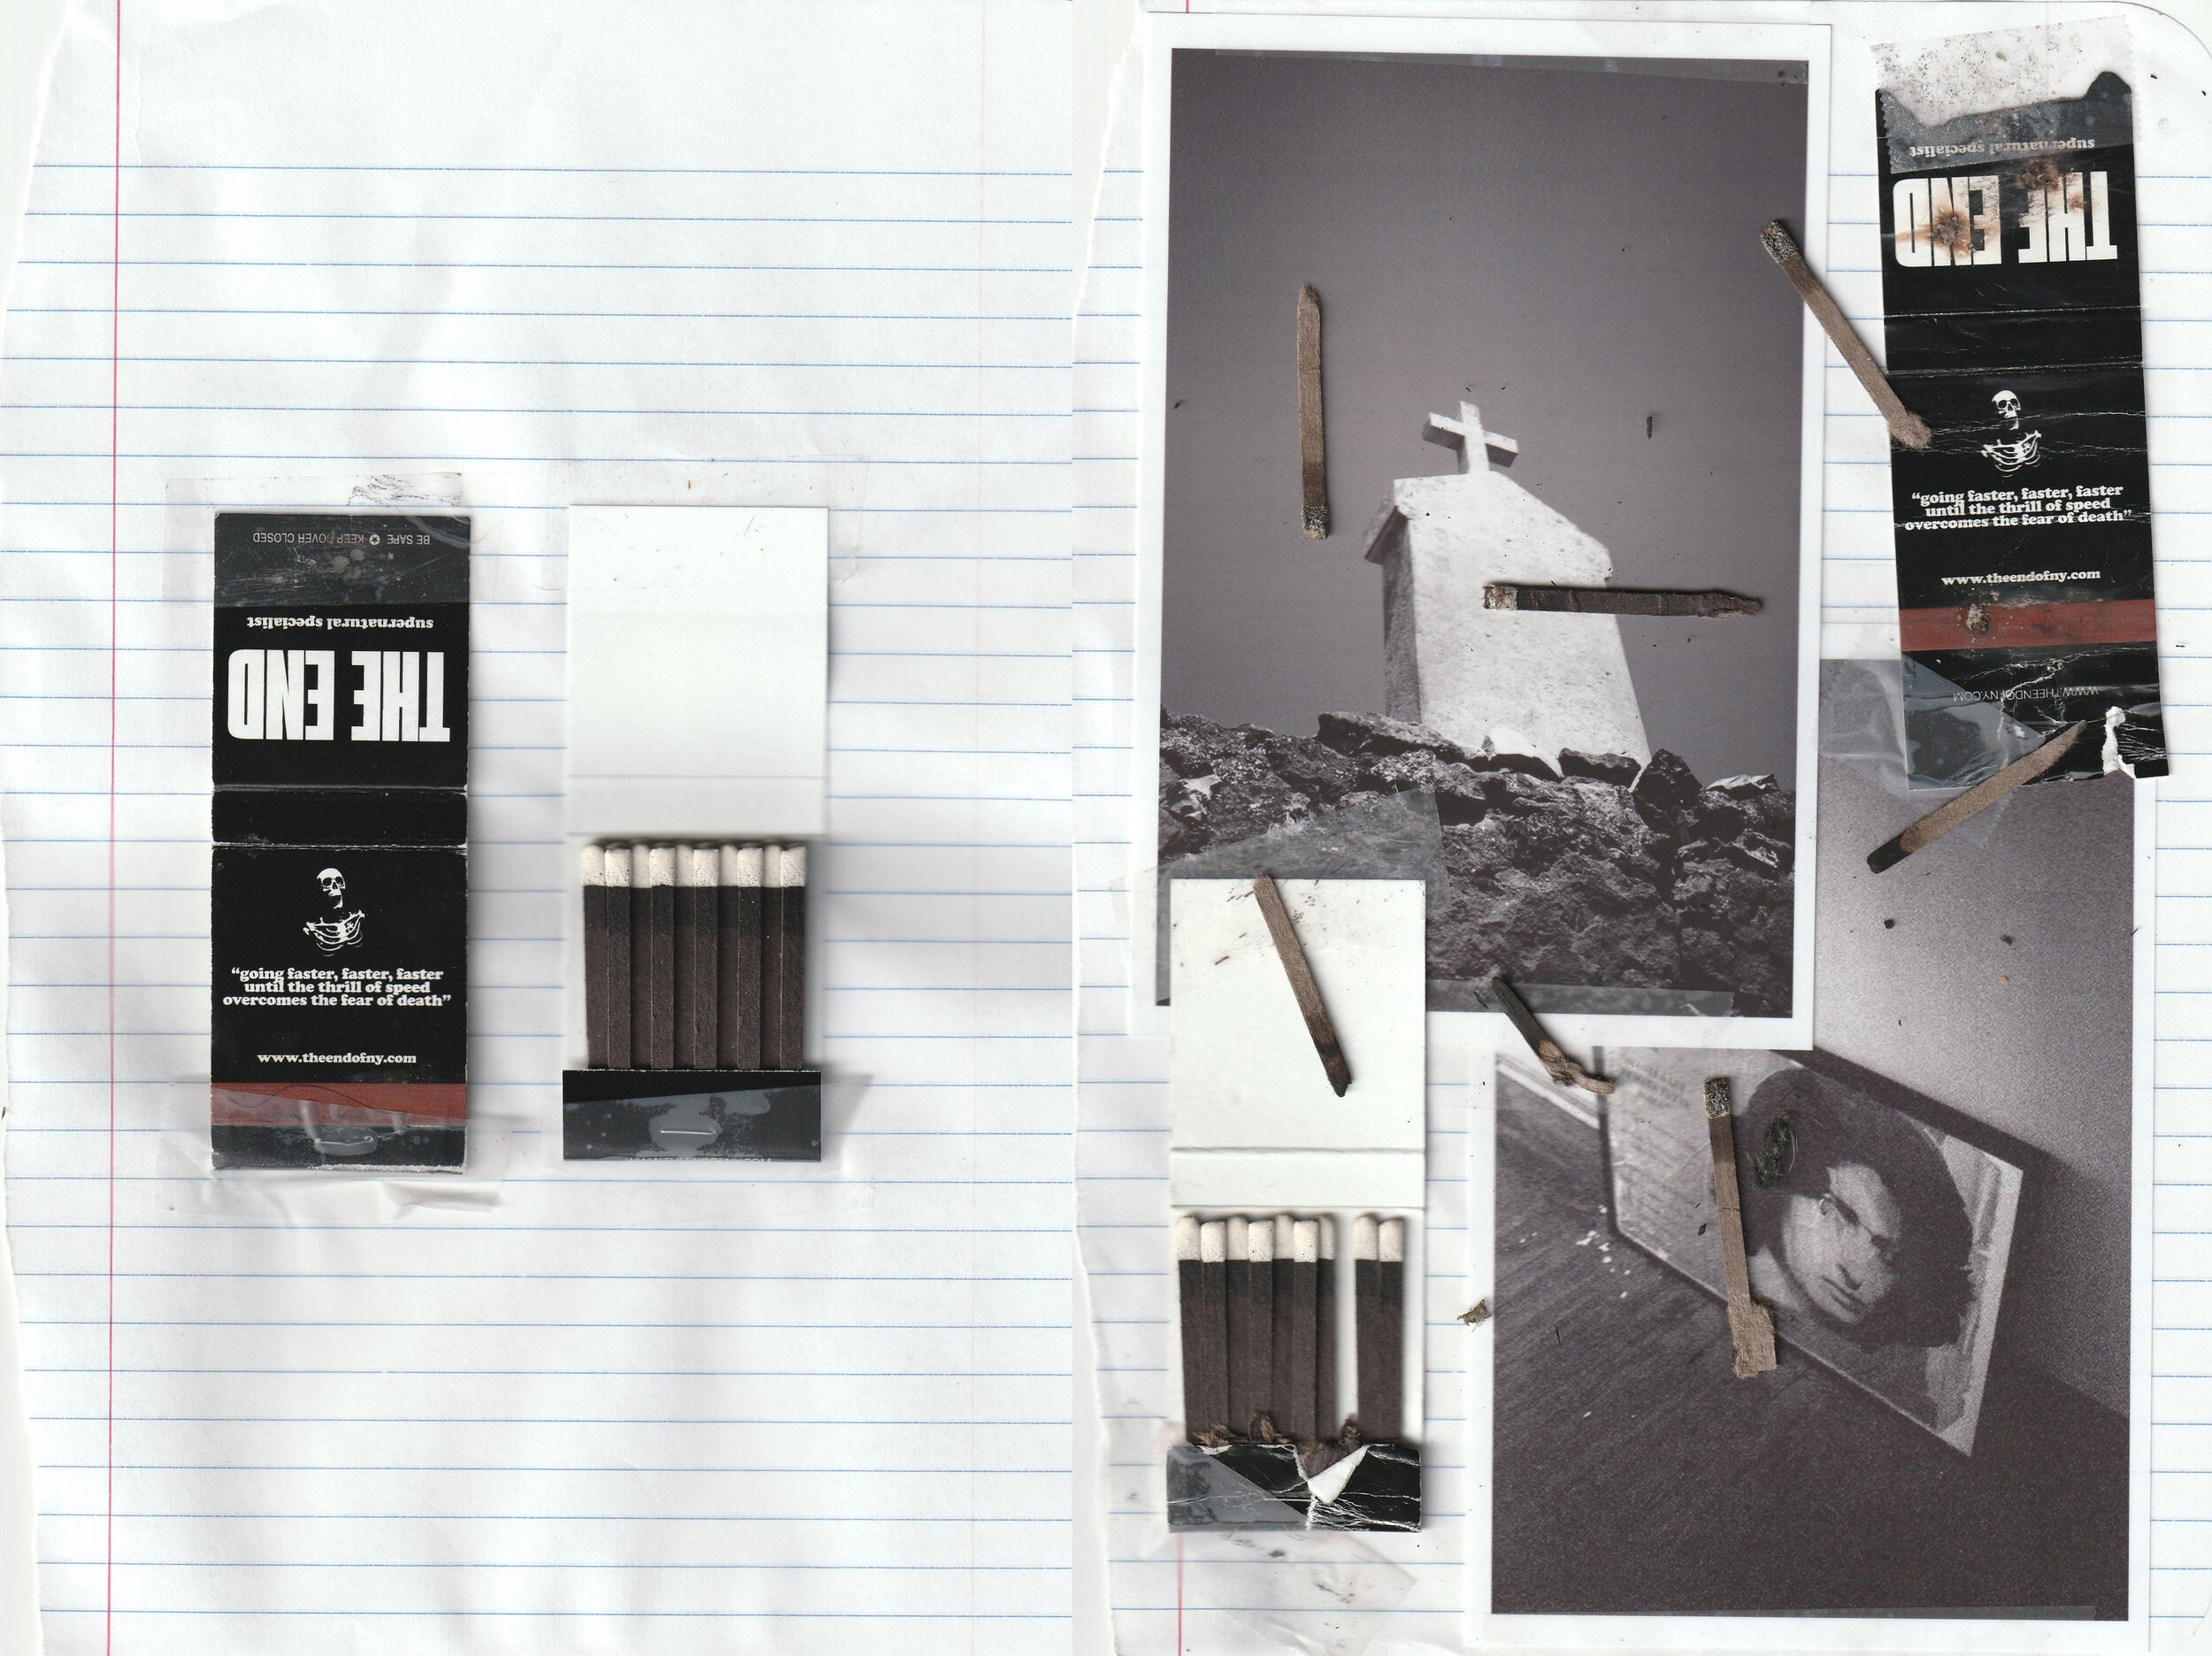 THE END OF NEW YORK- PROMOTIONAL MATCHES